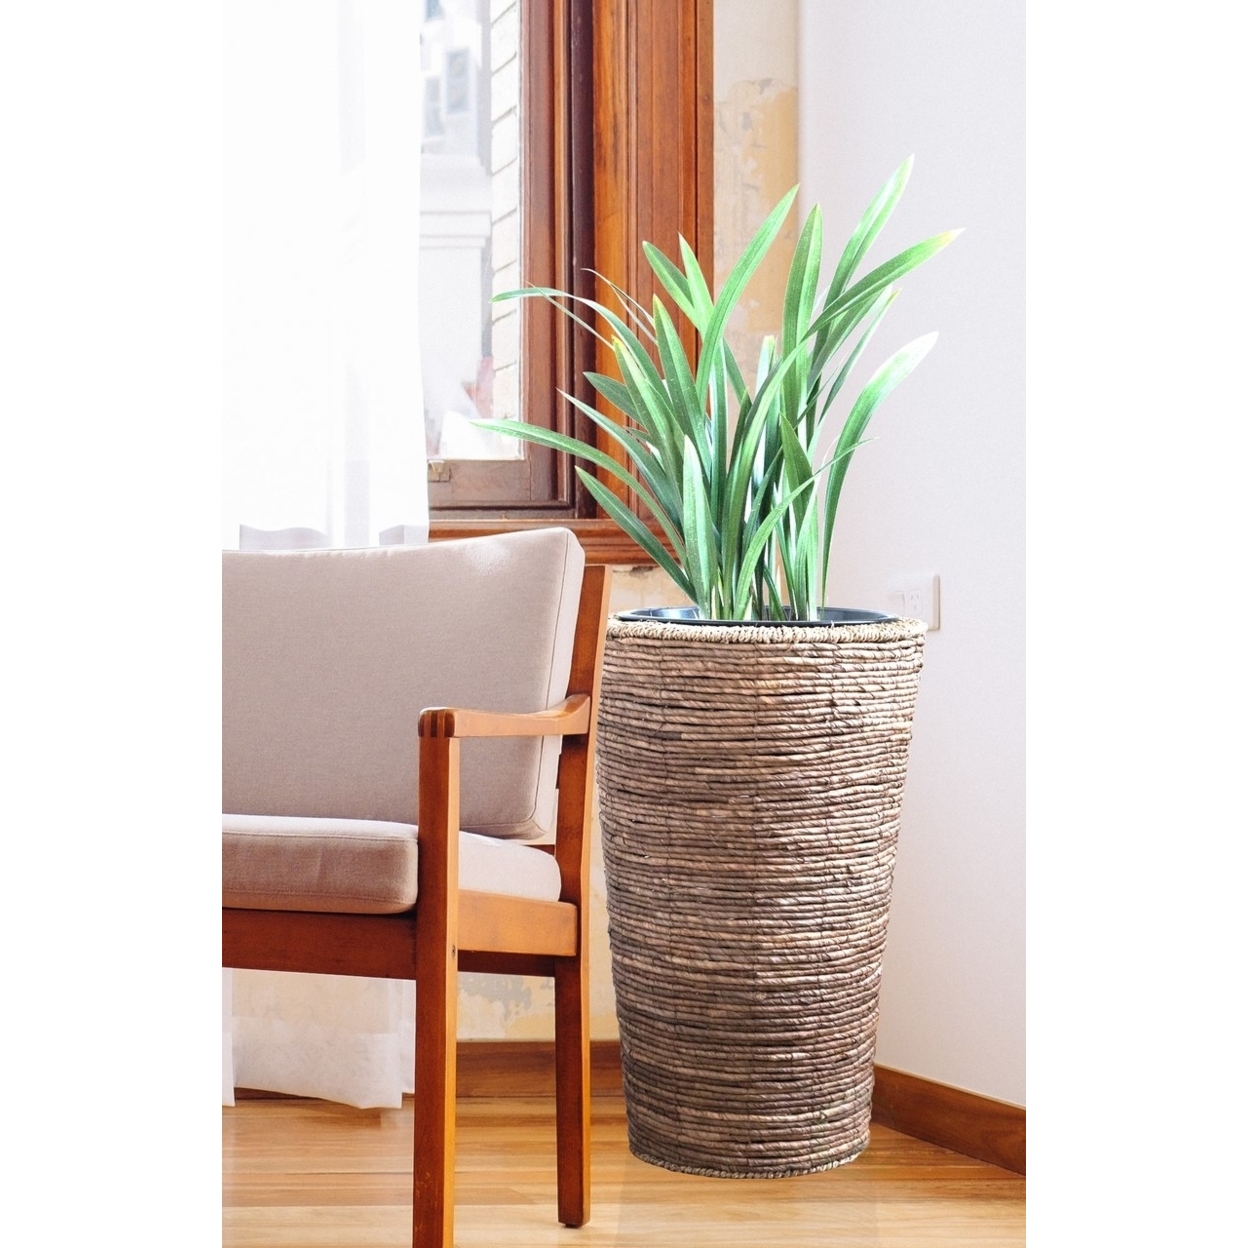 Wicker Banana Rope Tall Floor Planter With Metal Pot - Large